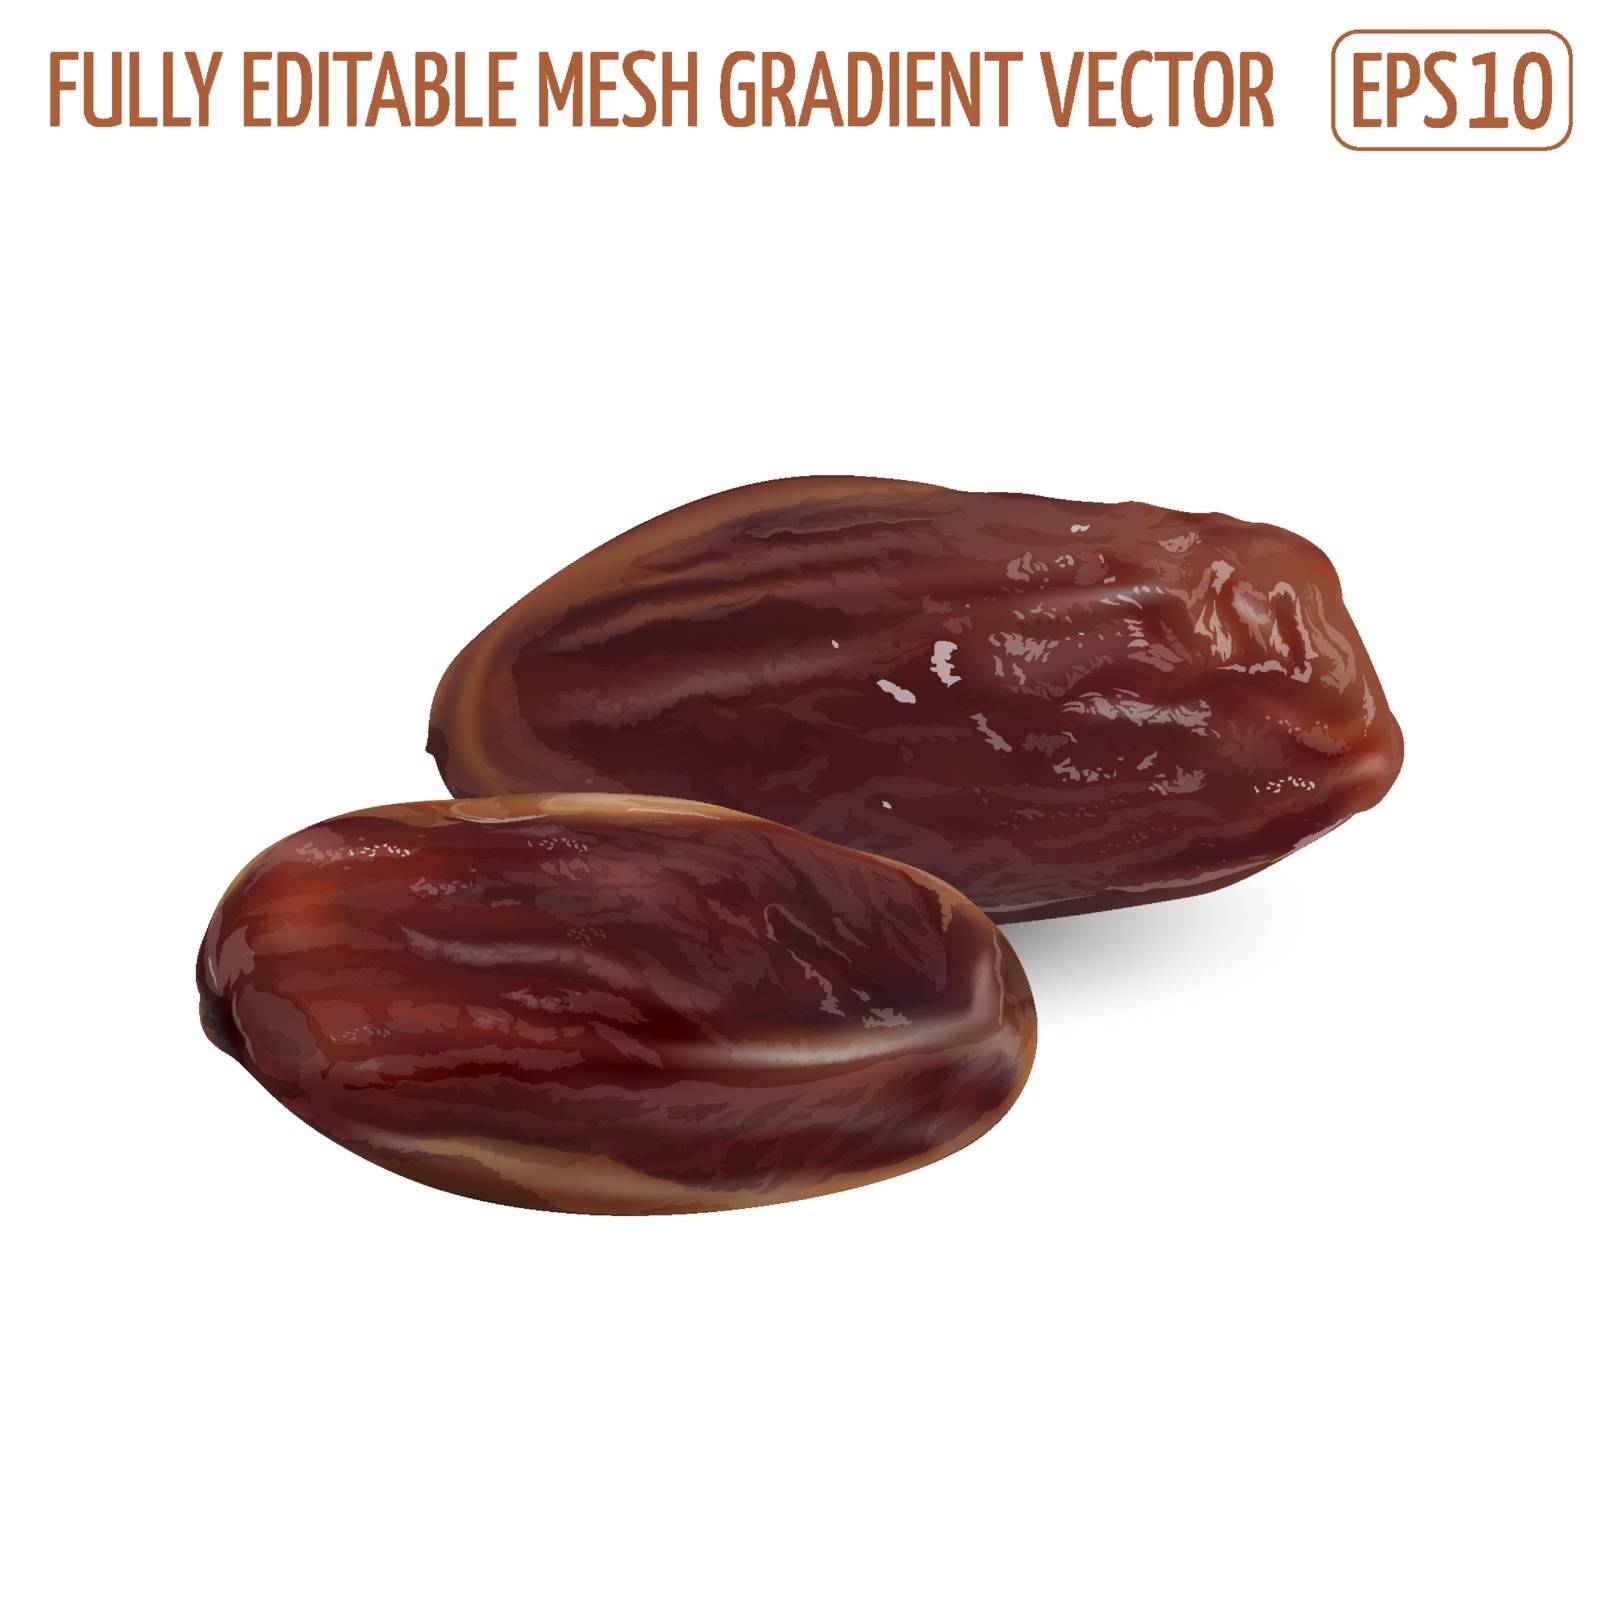 Dried date palm fruits on a white background. Realistic vector illustration.